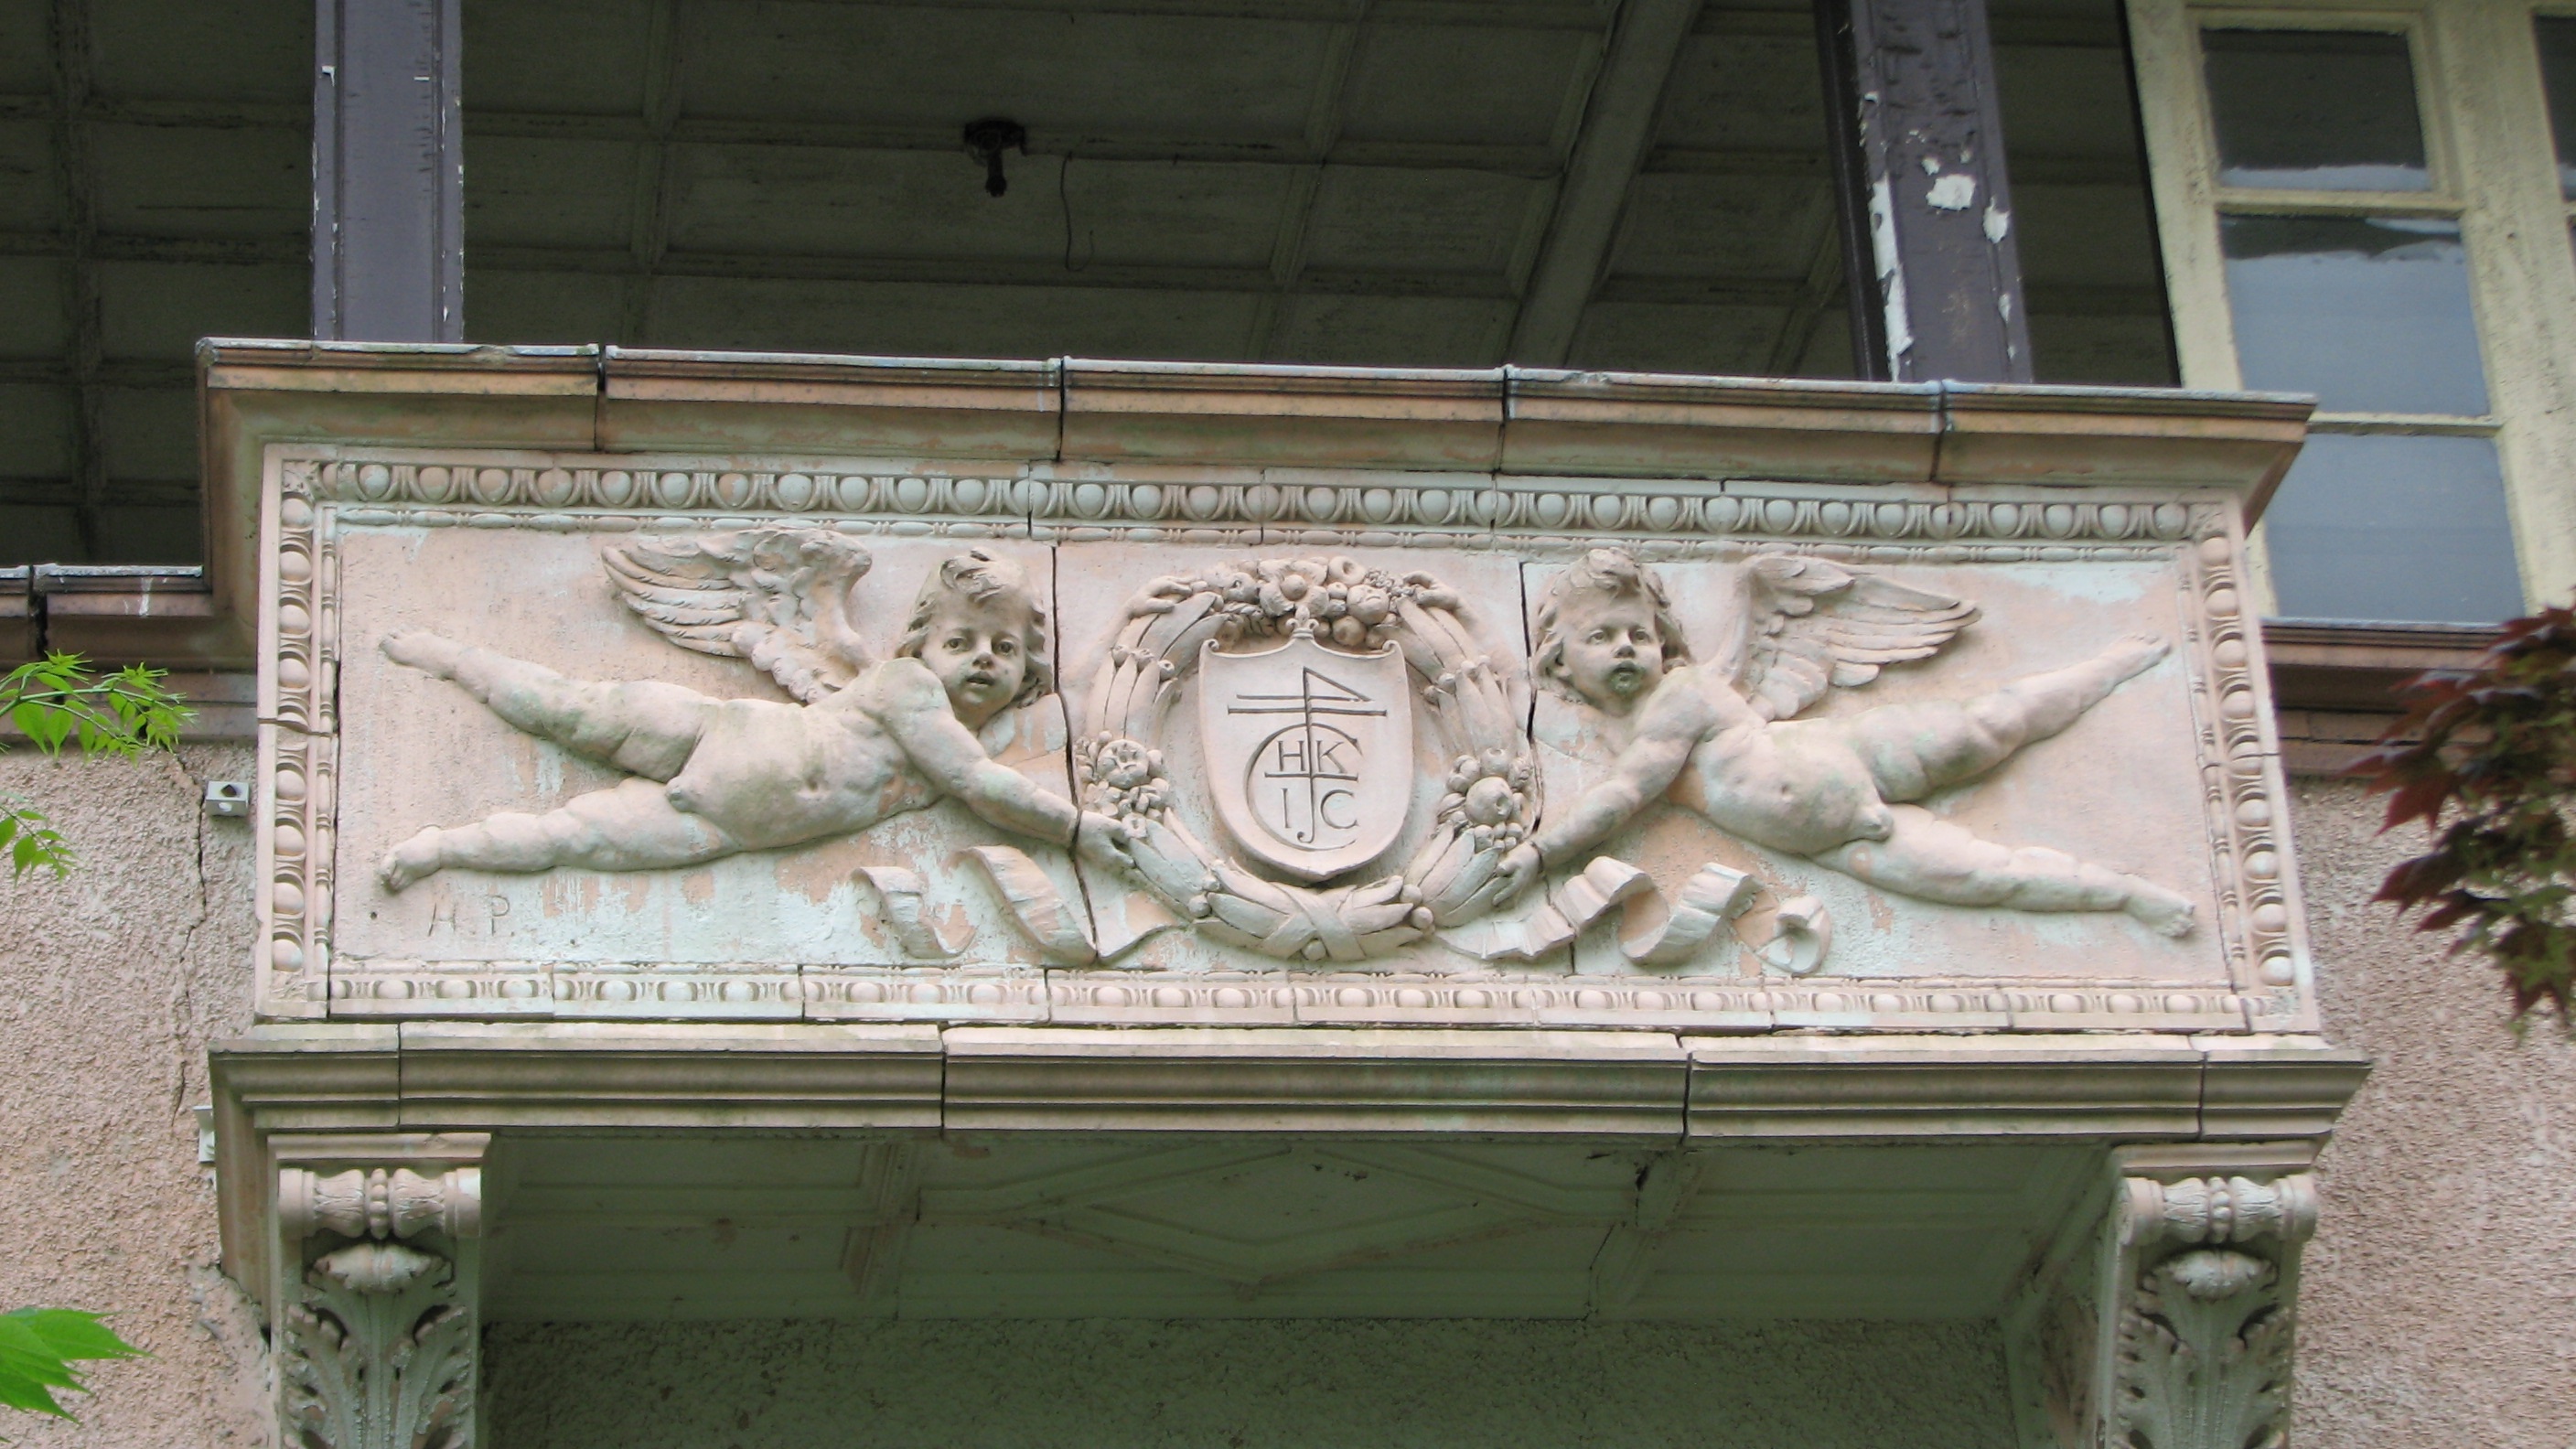 The carvings on the open loggia include the initial of the home’s original owner.